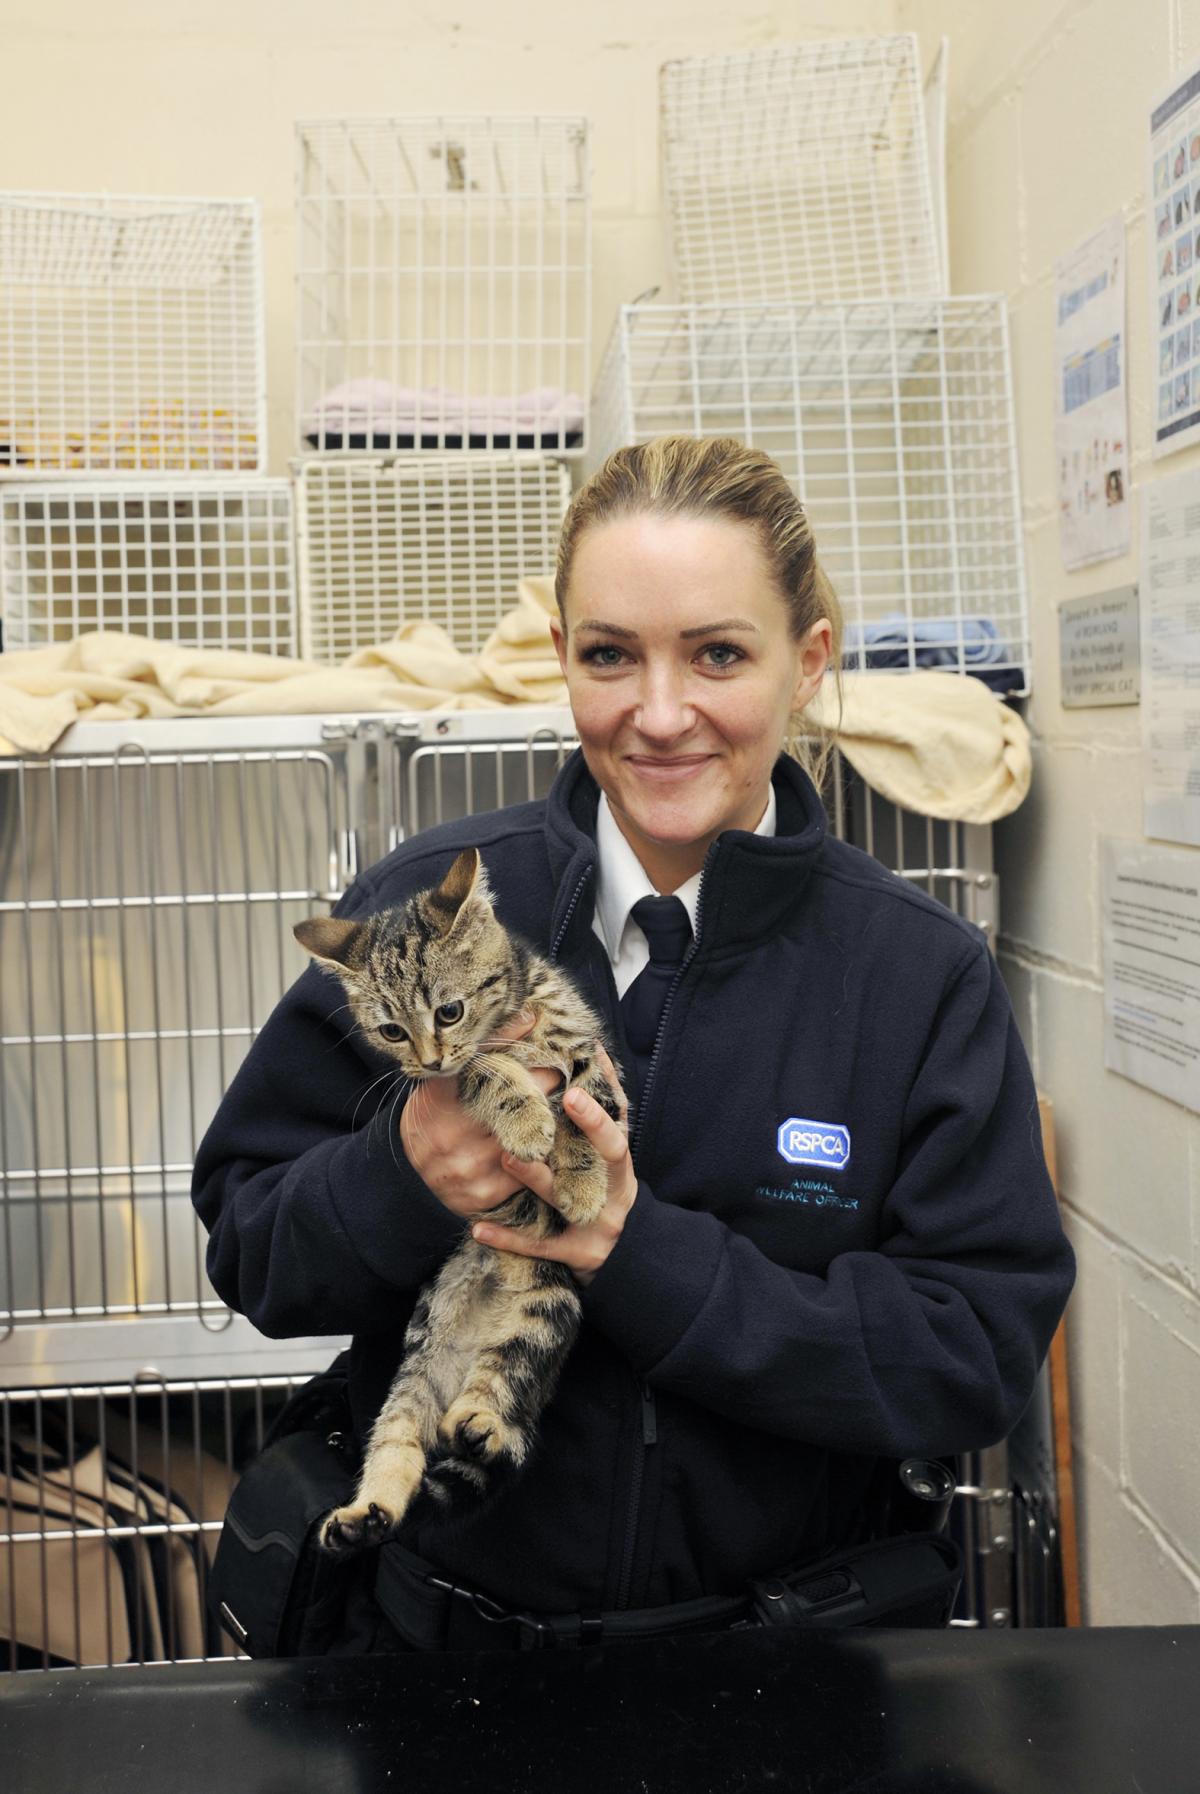 A day in the life of an RSPCA worker | Lancashire Telegraph